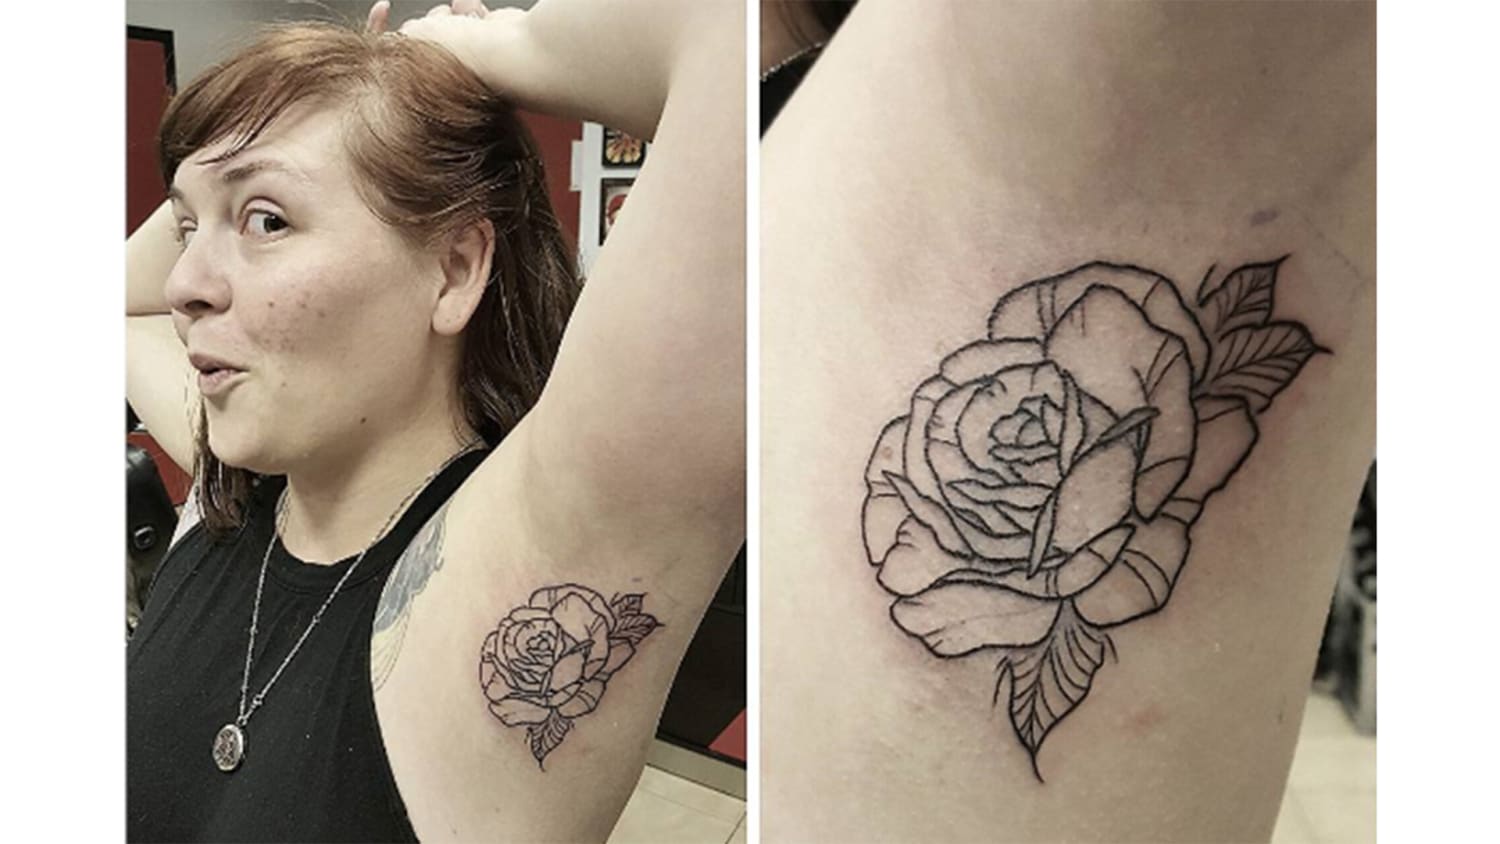 Armpit tattoos are the latest trend on Instagram